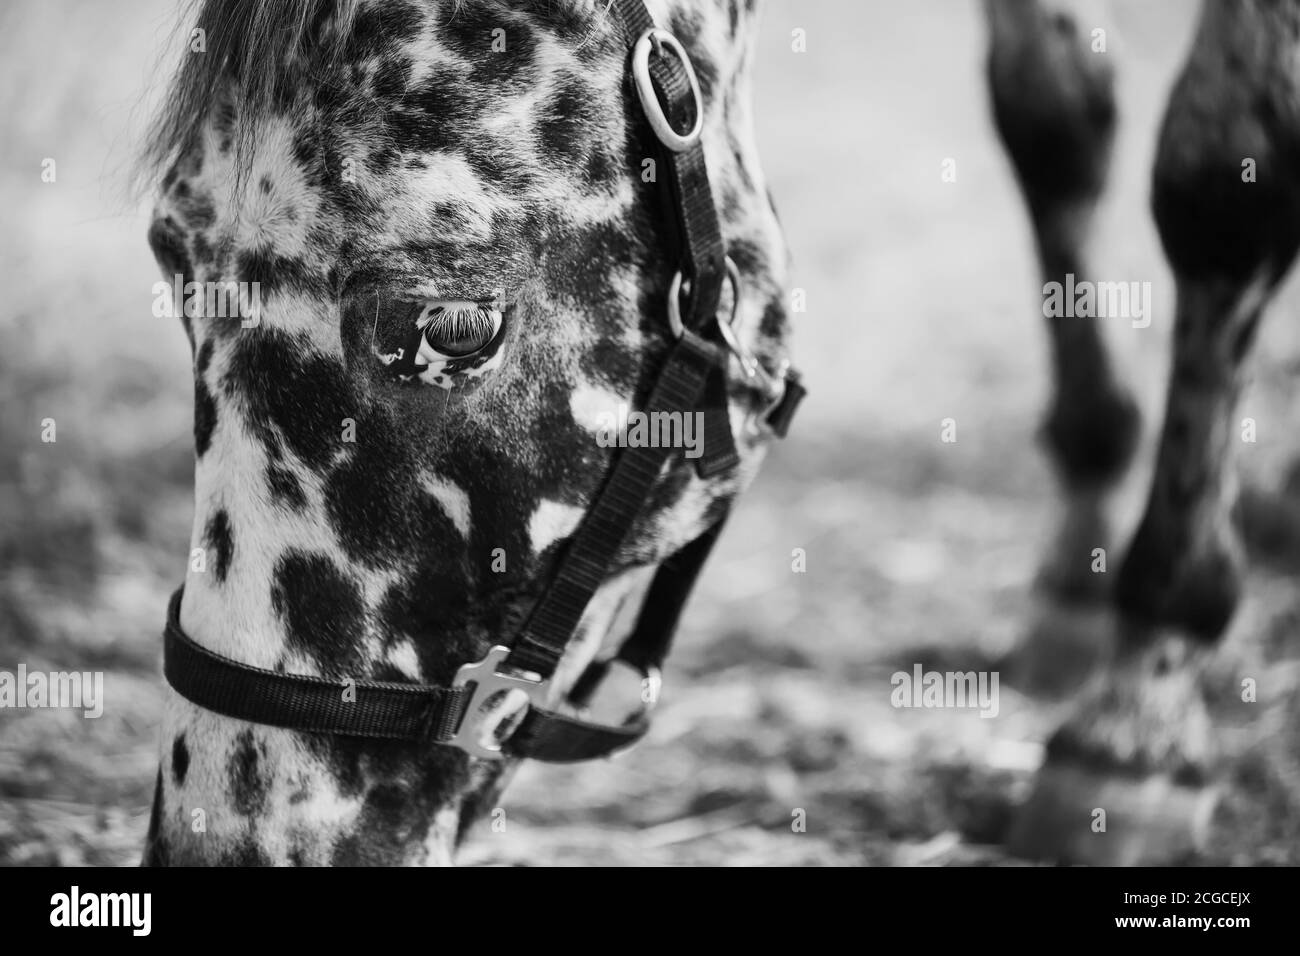 Black-and-white close-up portrait of a beautiful spotted horse with white eyelashes and a halter on its muzzle that grazes and eats. Stock Photo